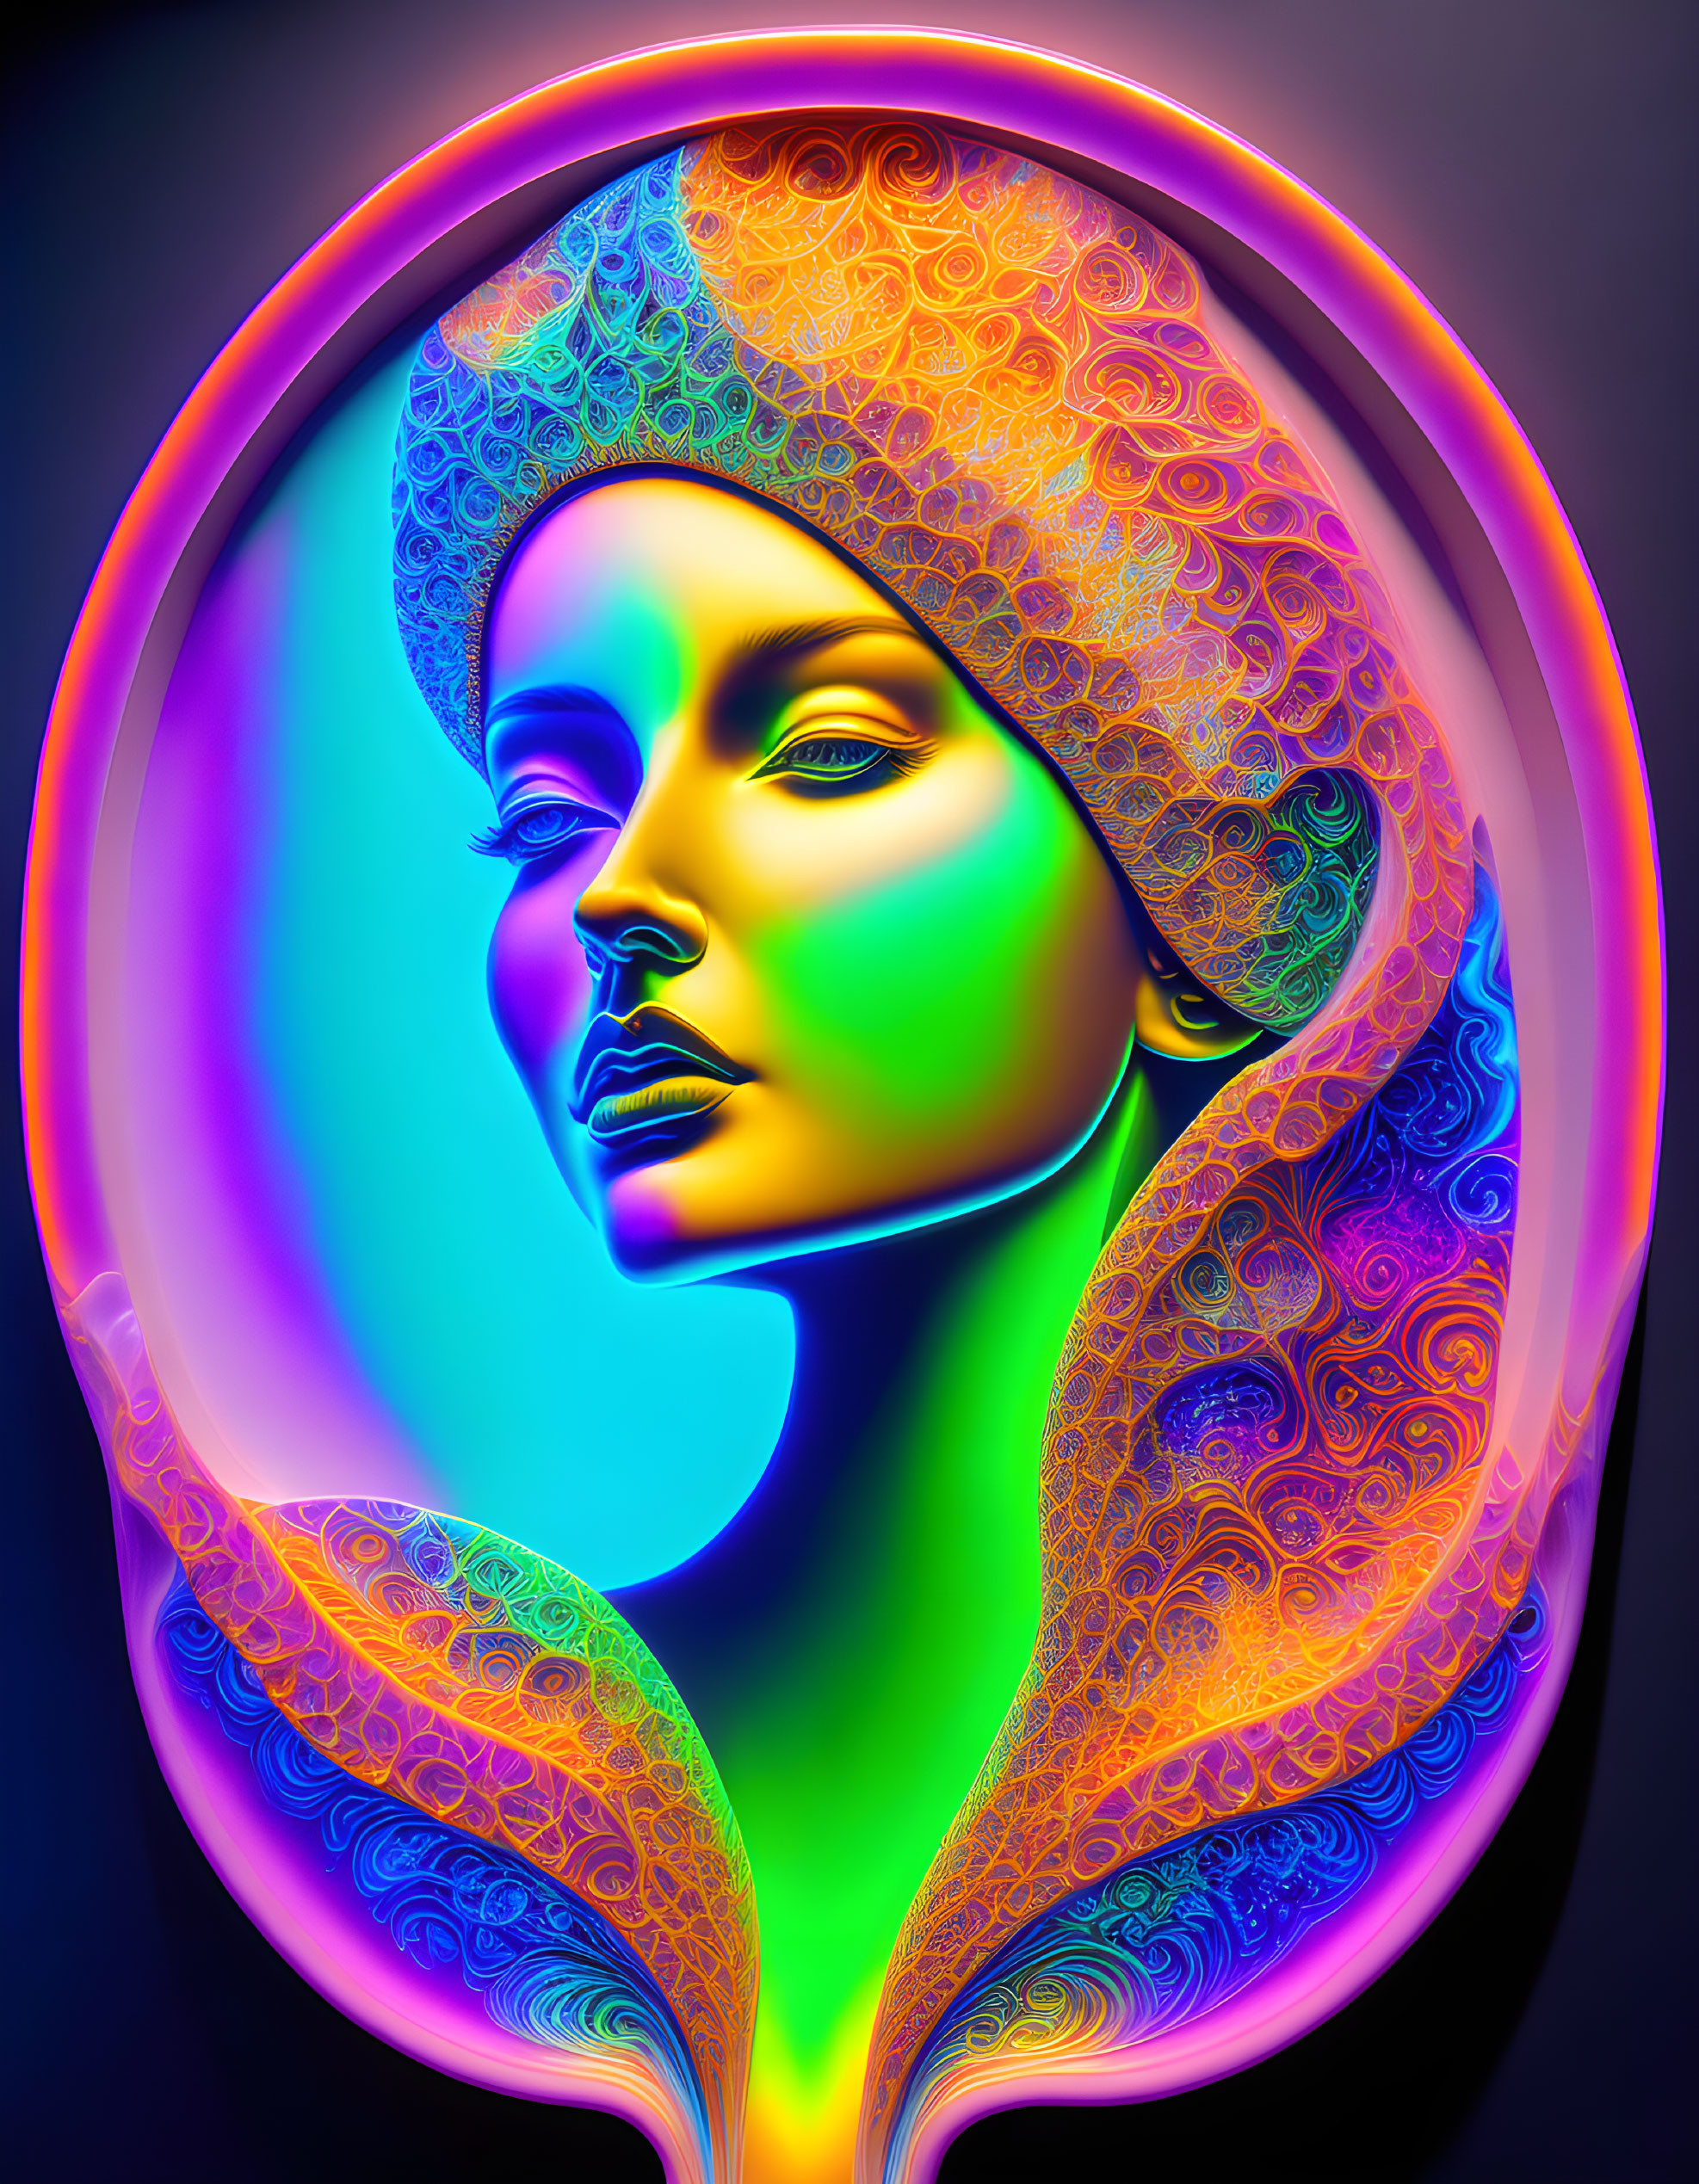 Colorful Psychedelic Portrait of Woman with Paisley Pattern and Radiant Aura